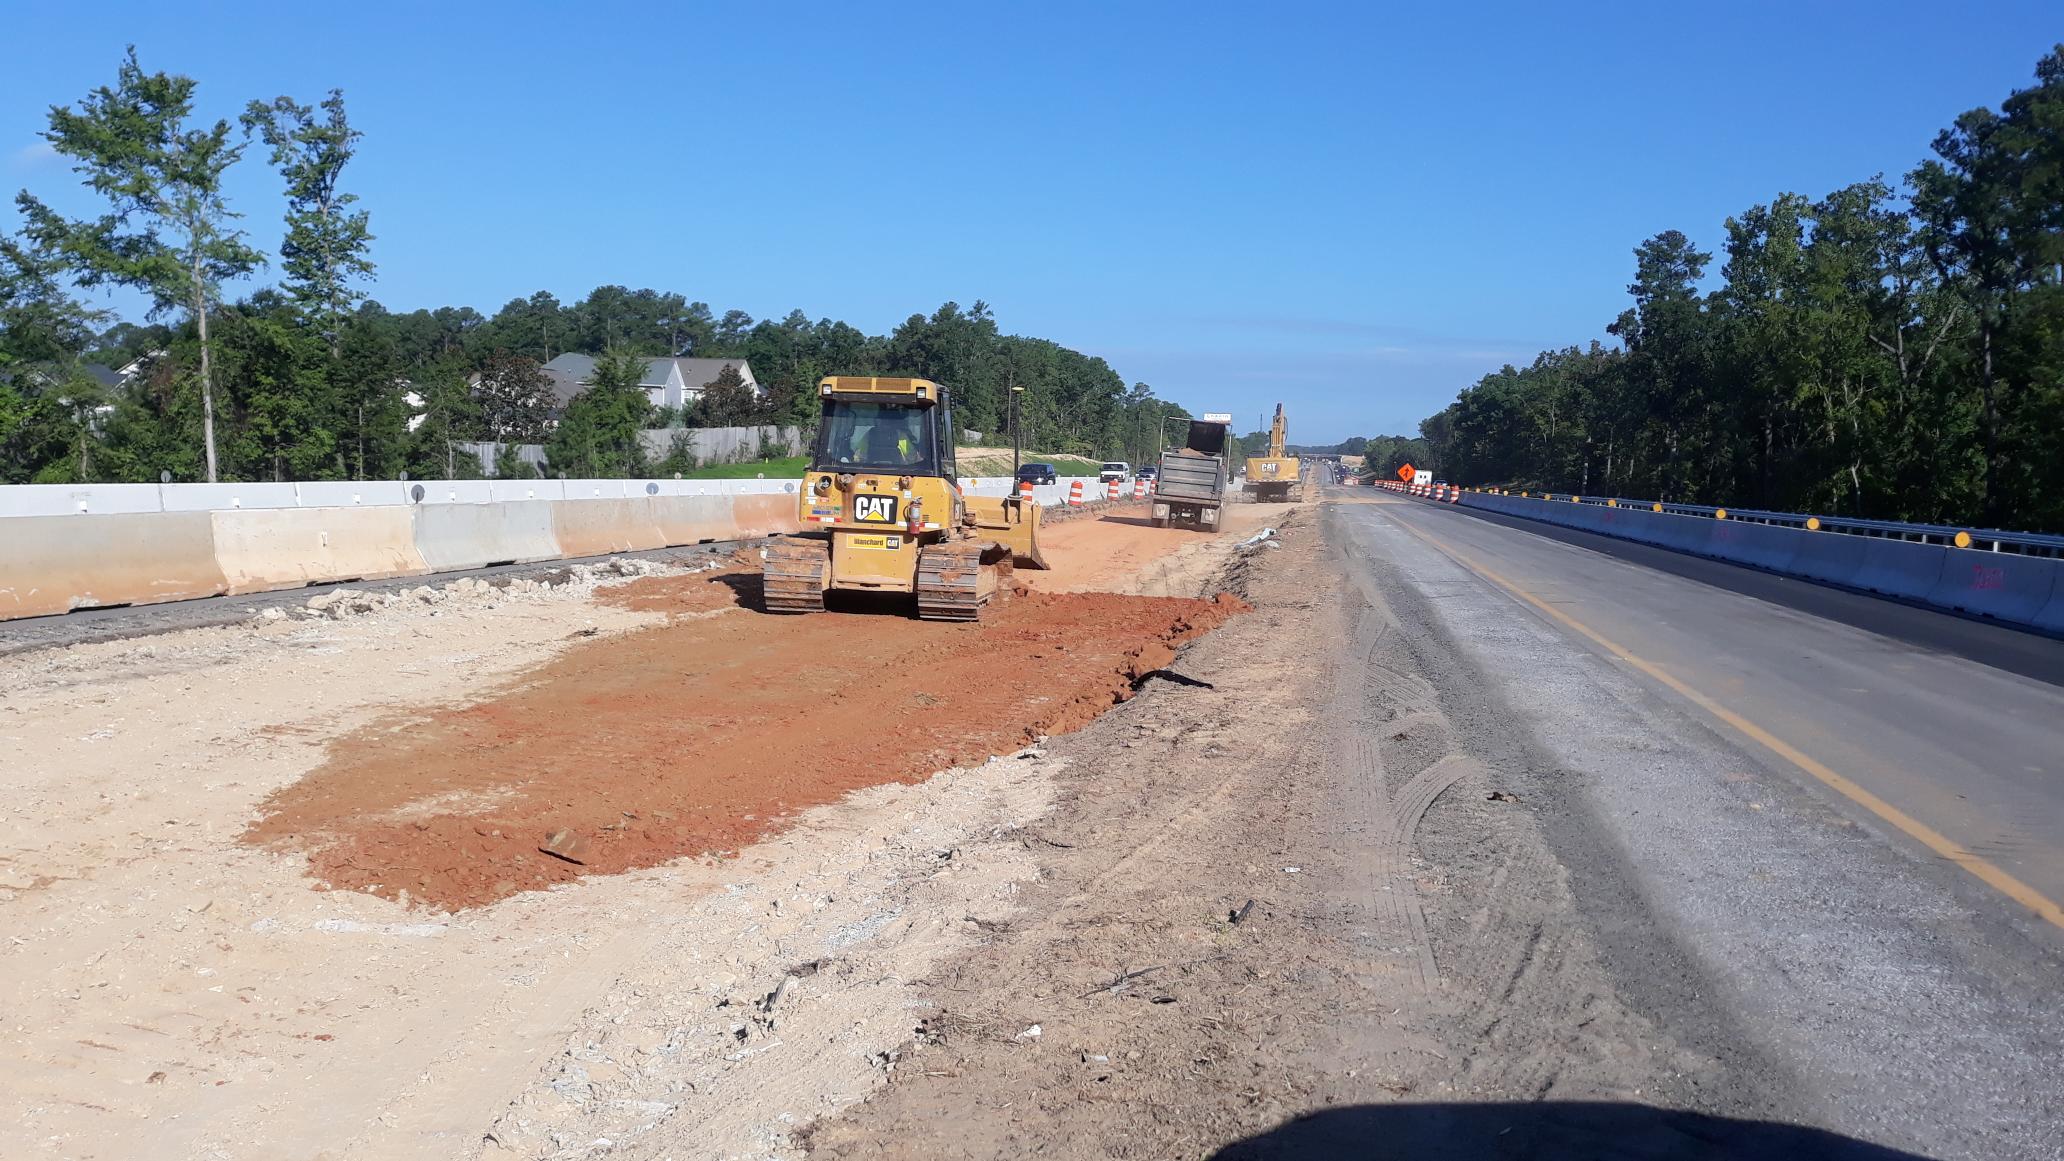 This photo shows the median area on I-26 between Shady Grove Road and Broad River Road.